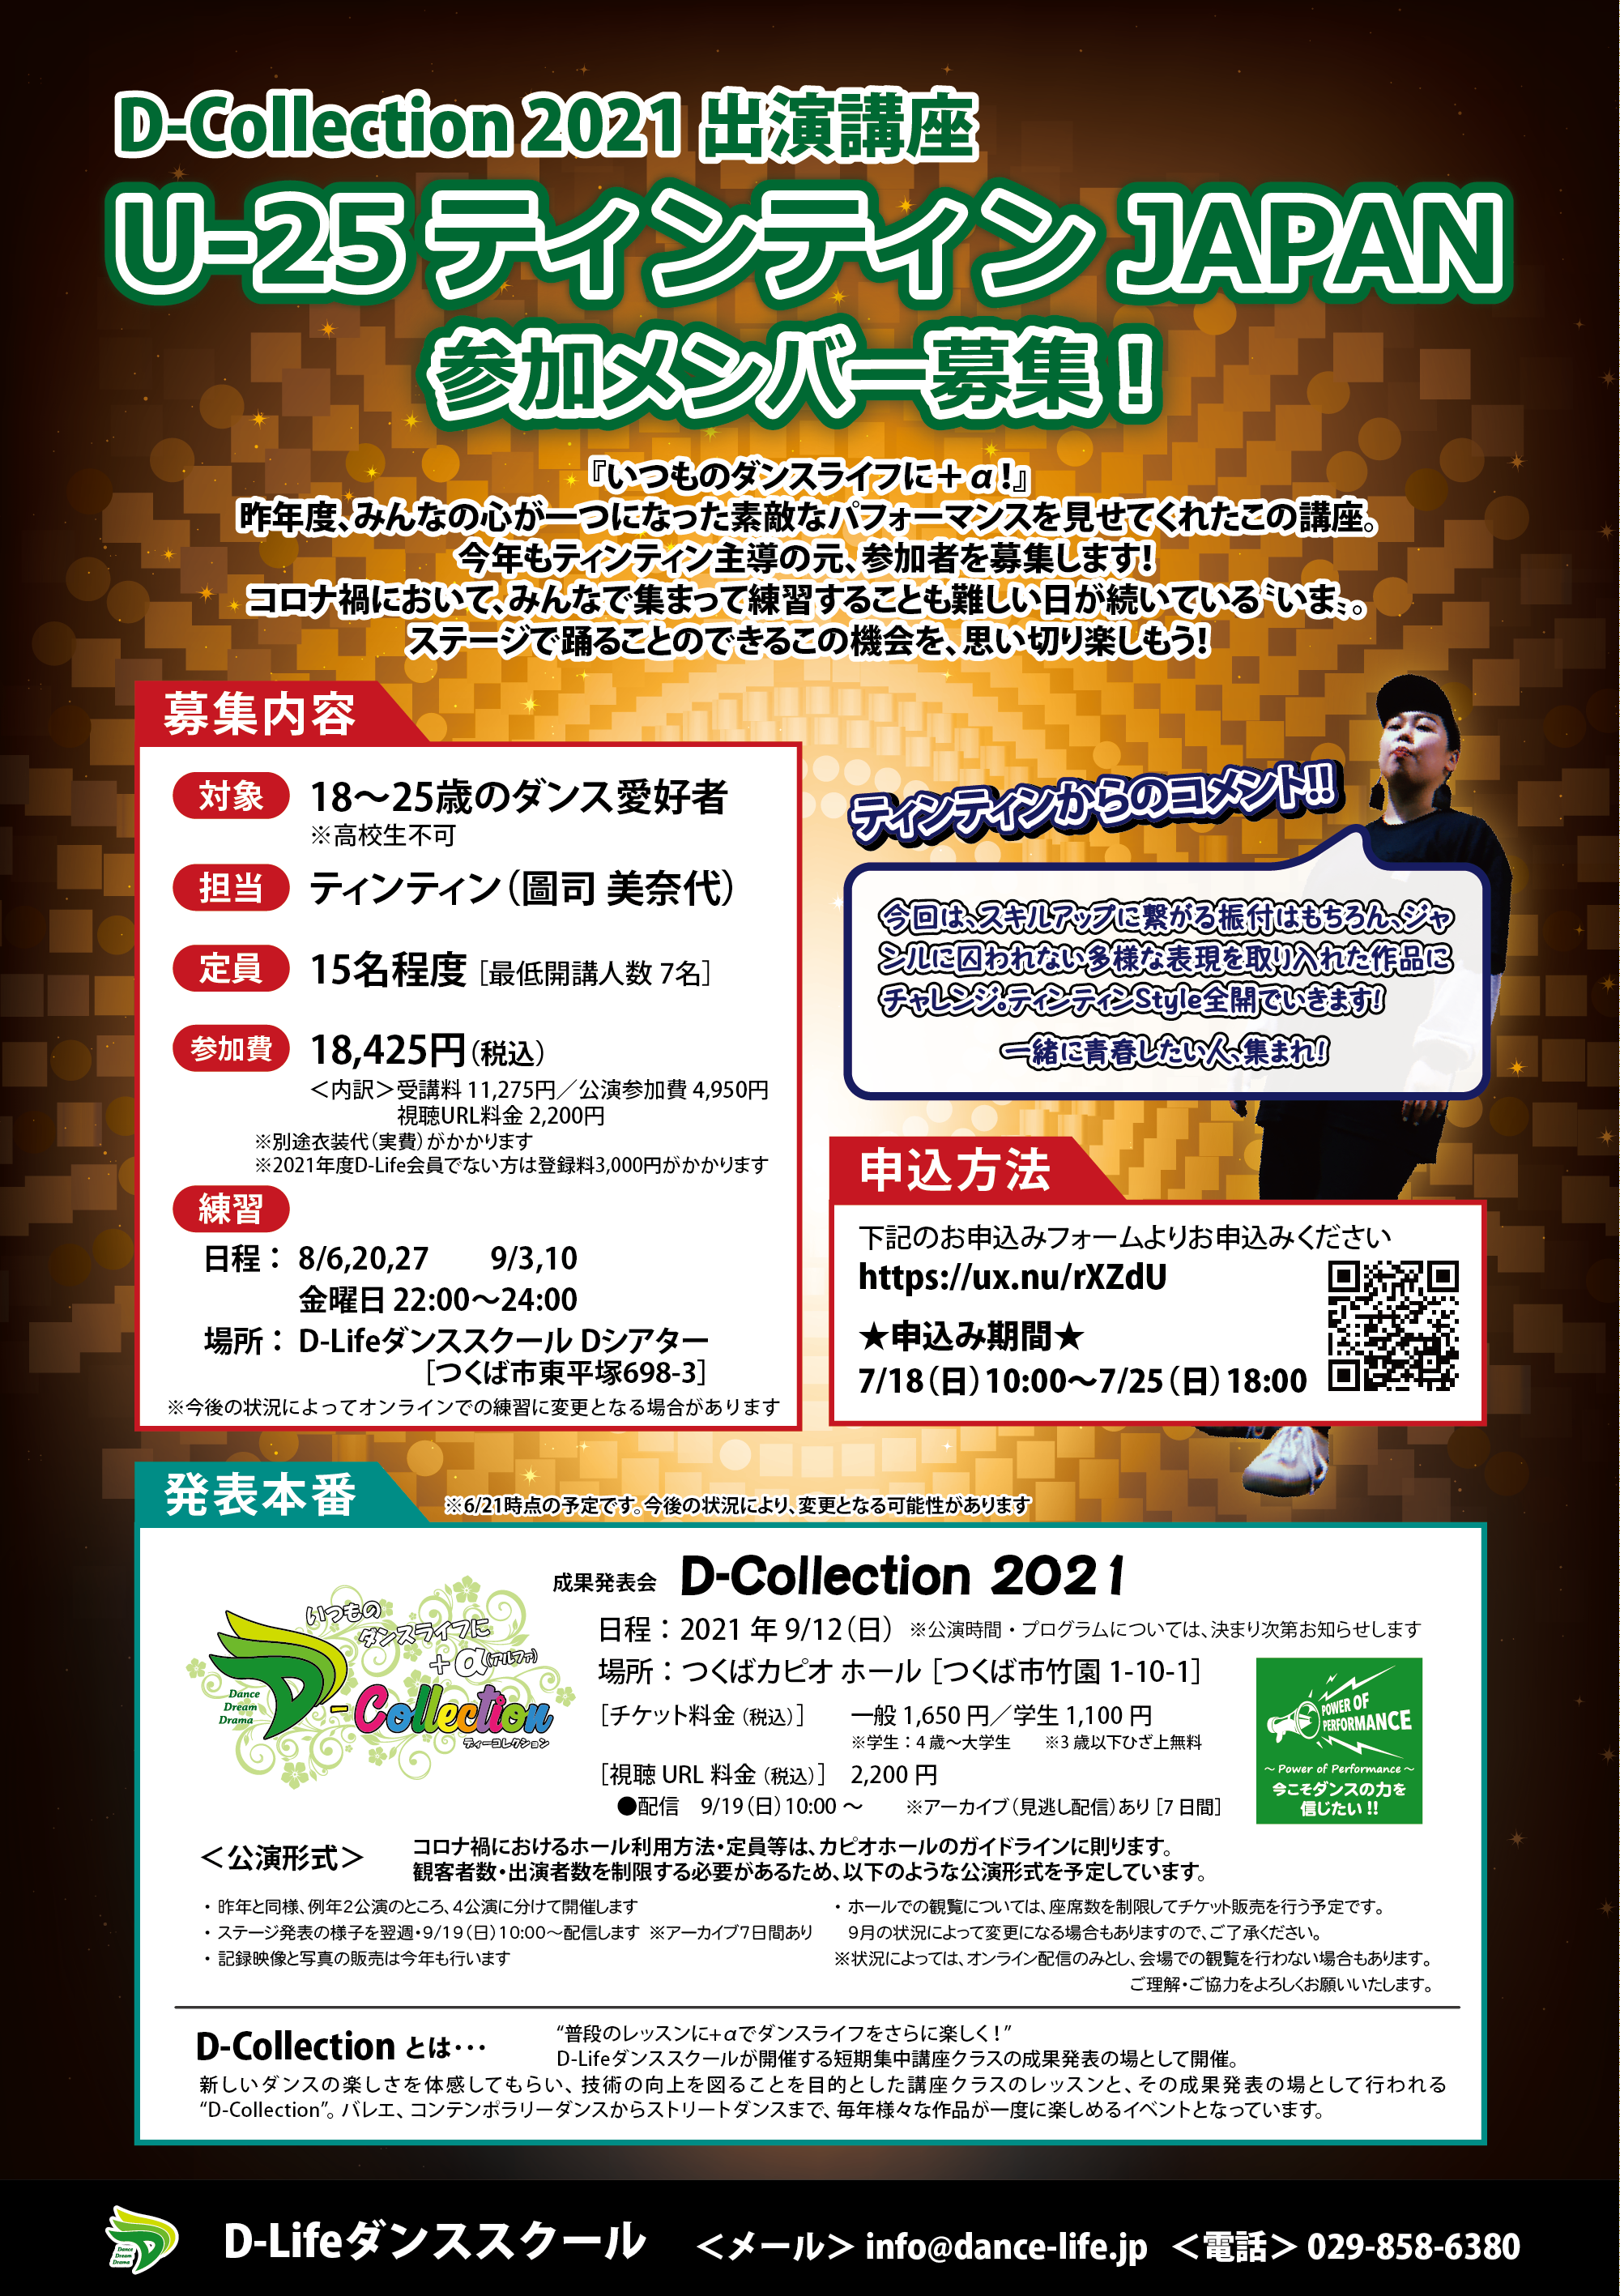 0623_Dcolleciton_2021_timtimJAPAN.png